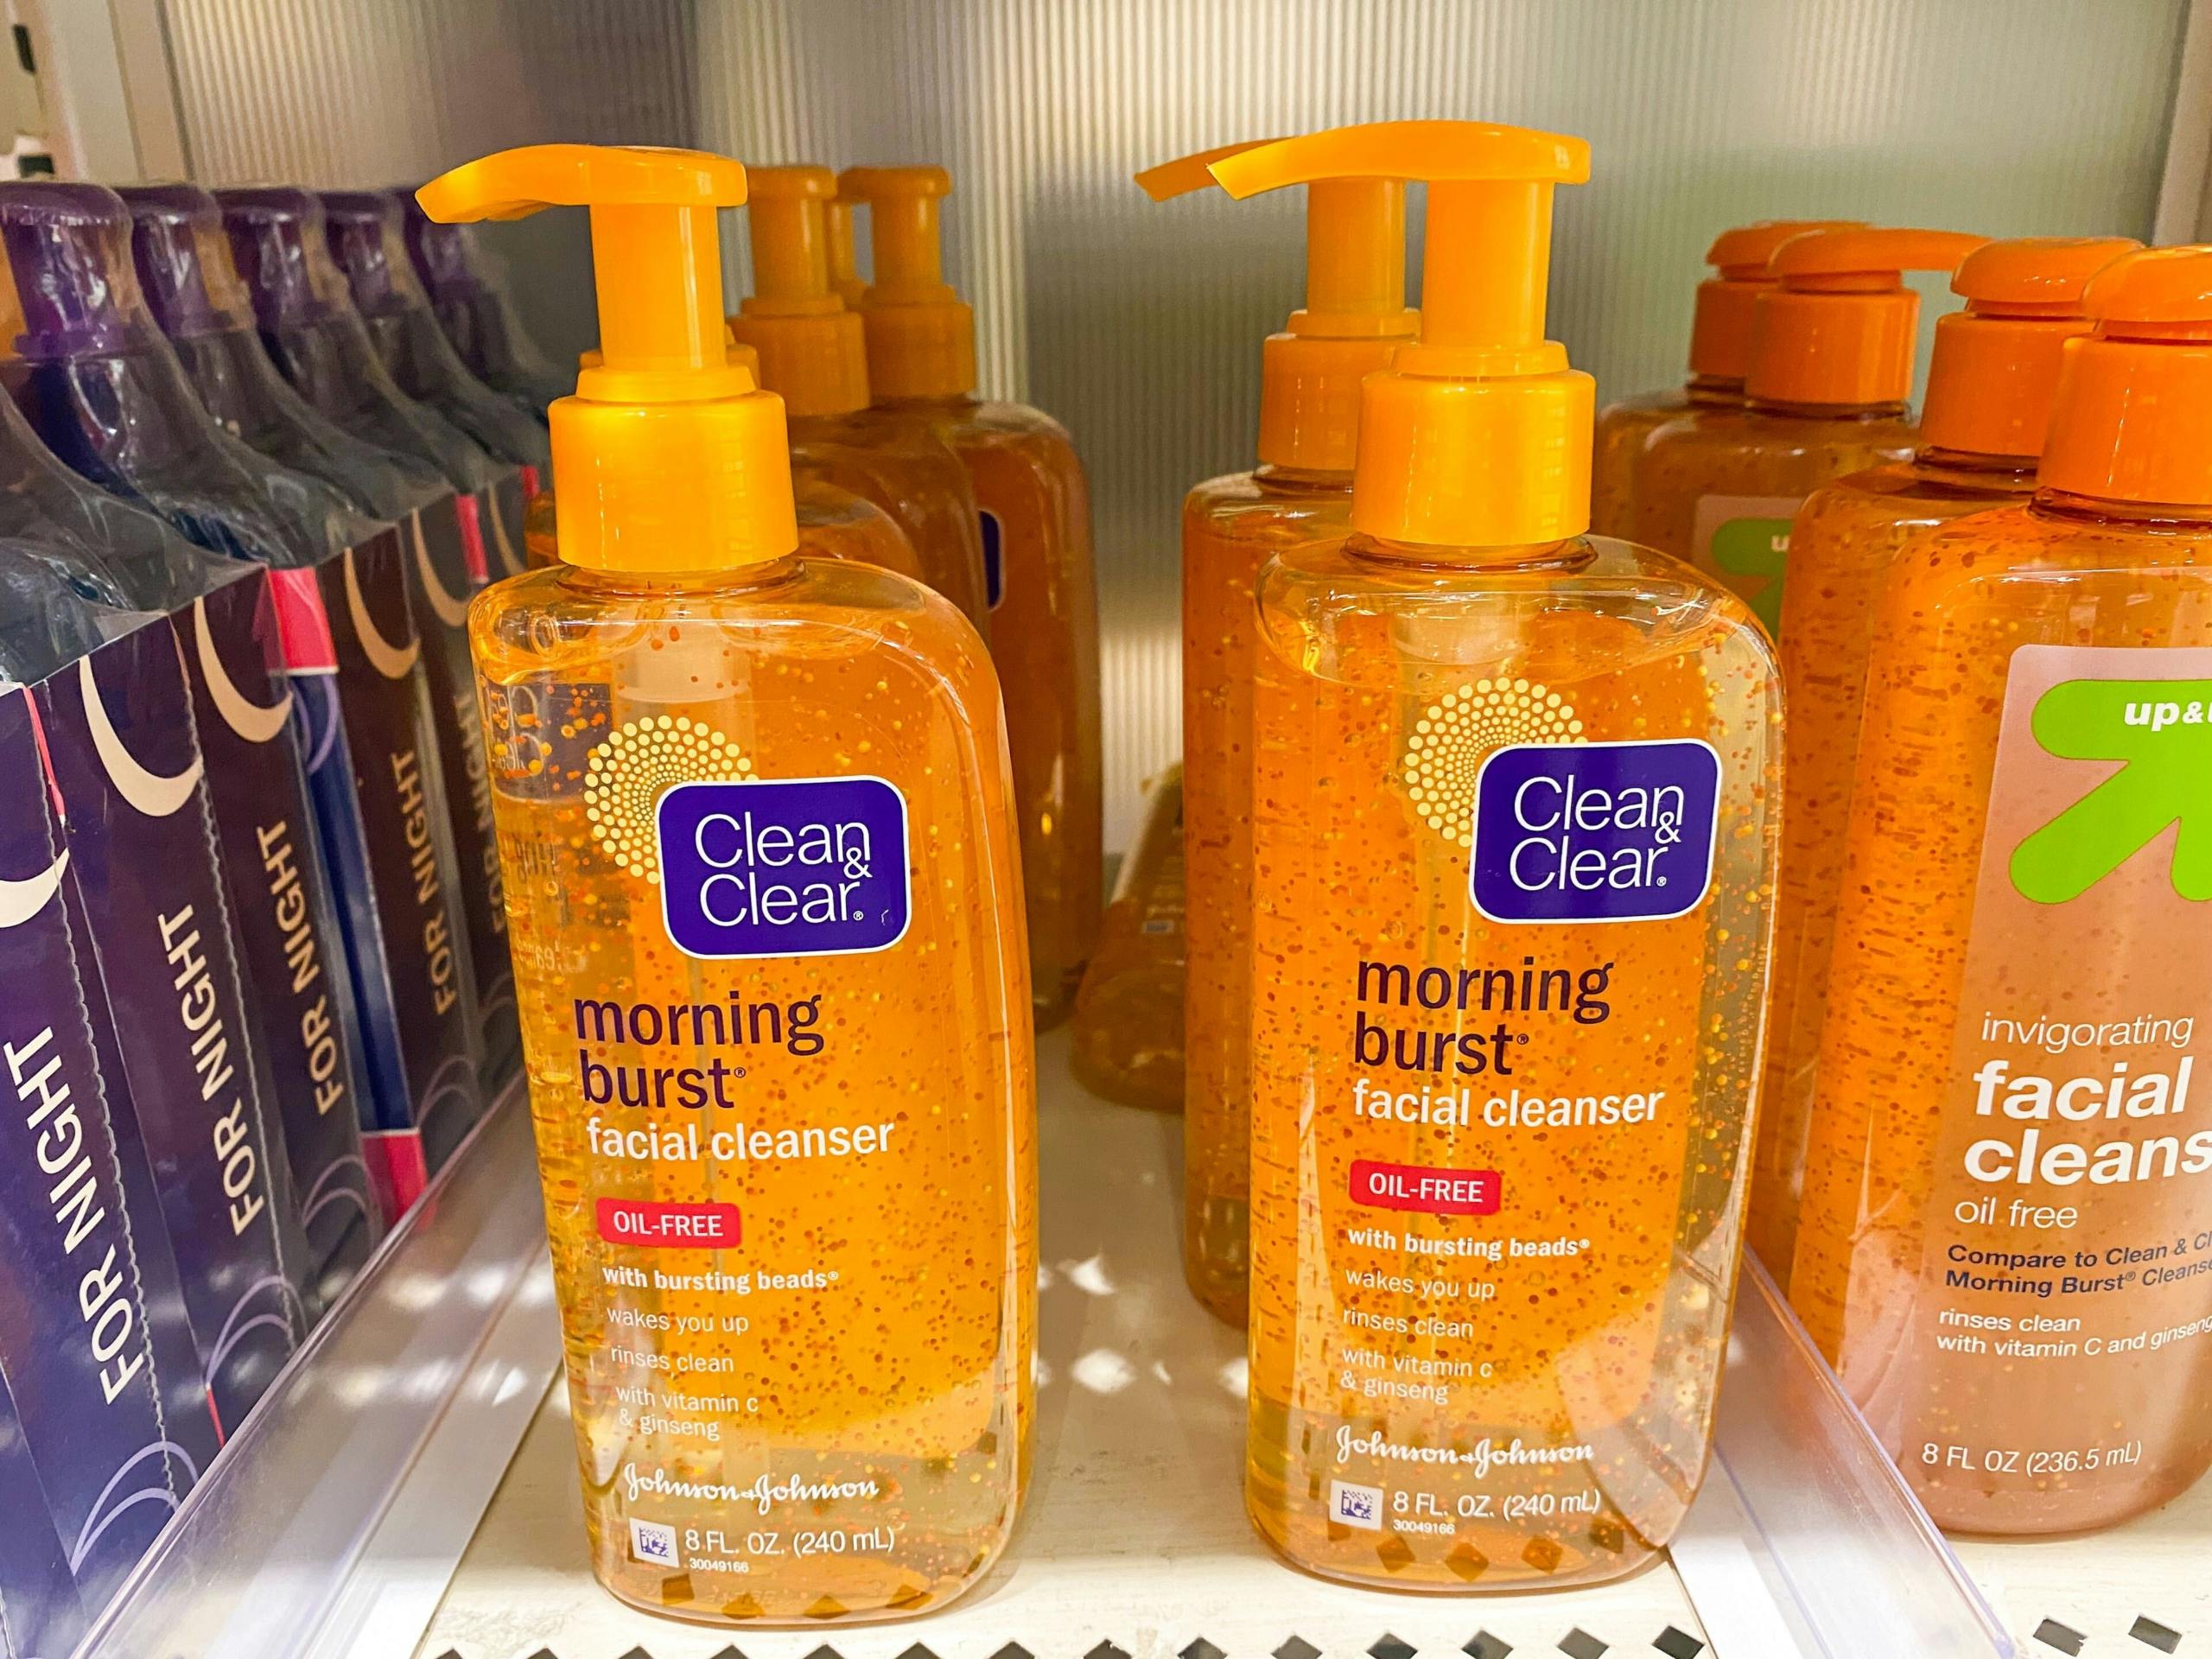 Bottles of Clean and Clear facial cleanser on a store shelf.